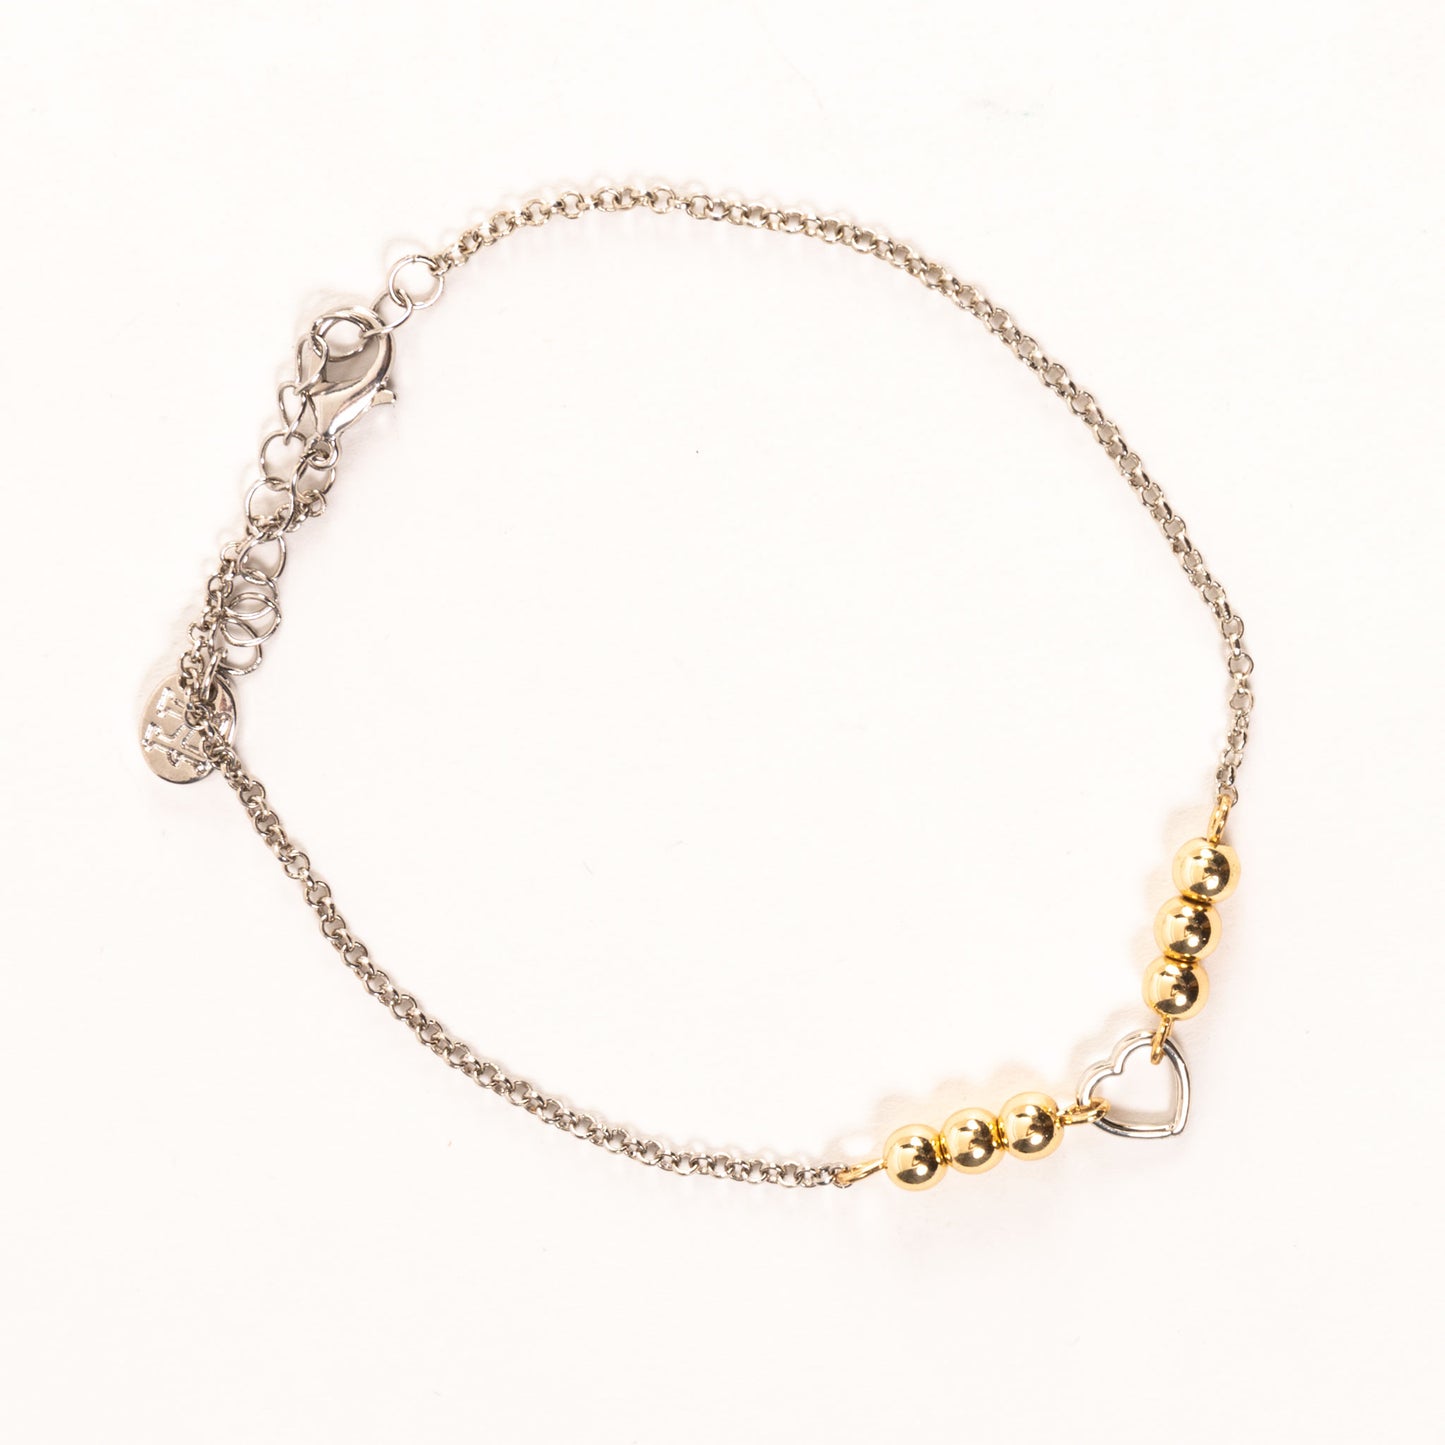 Alexis Gold & Silver Beaded Heart Charm Anklet